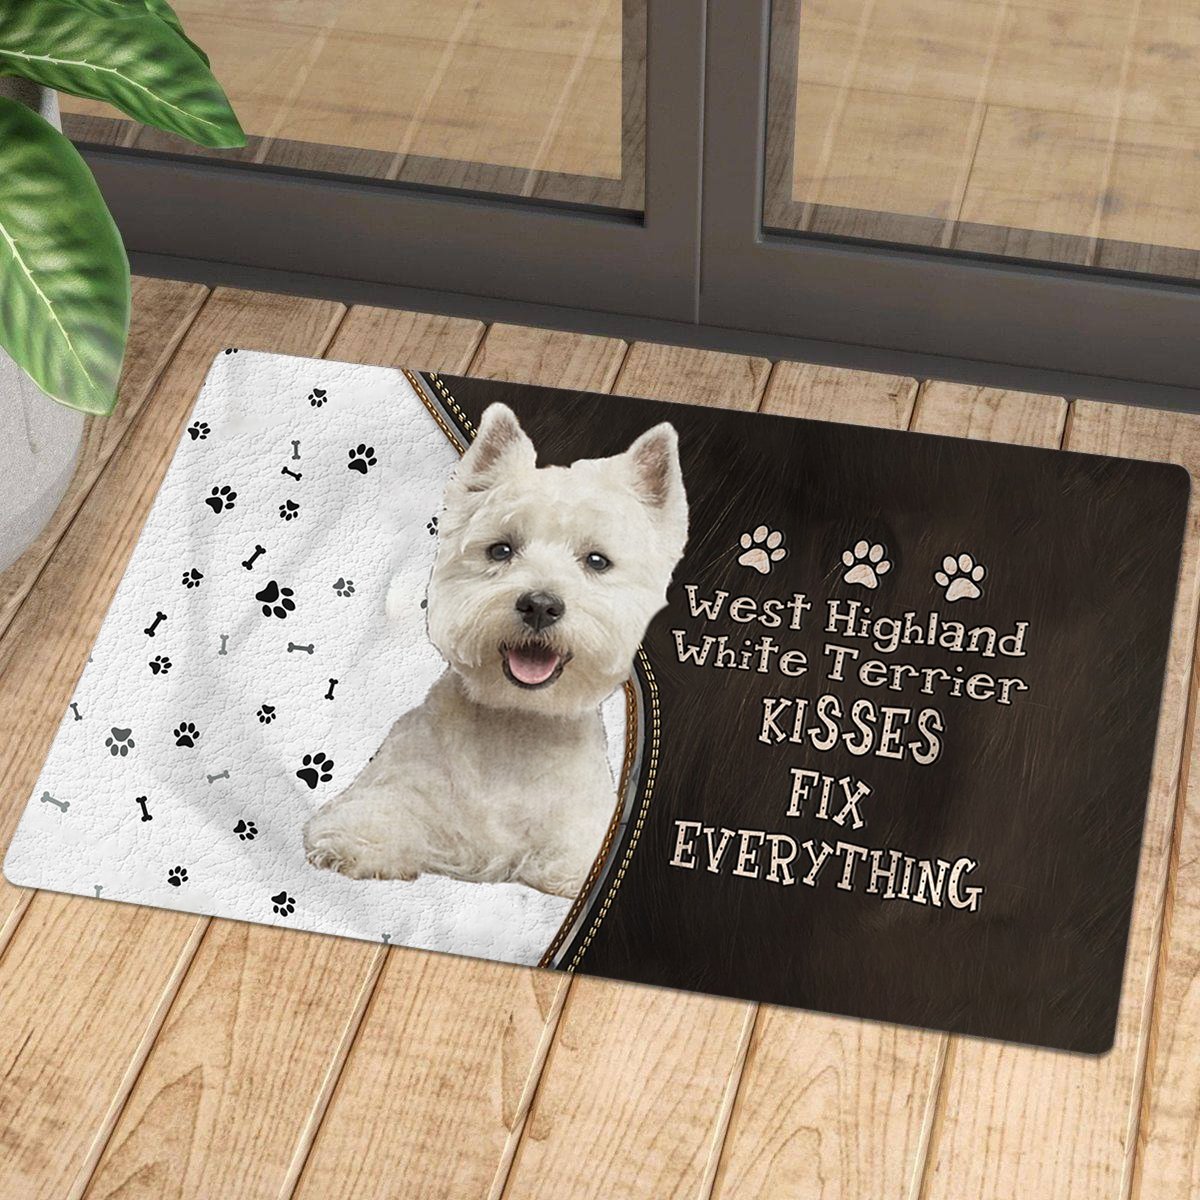 West Highland White Terrier Kisses Fix Everything Doormat